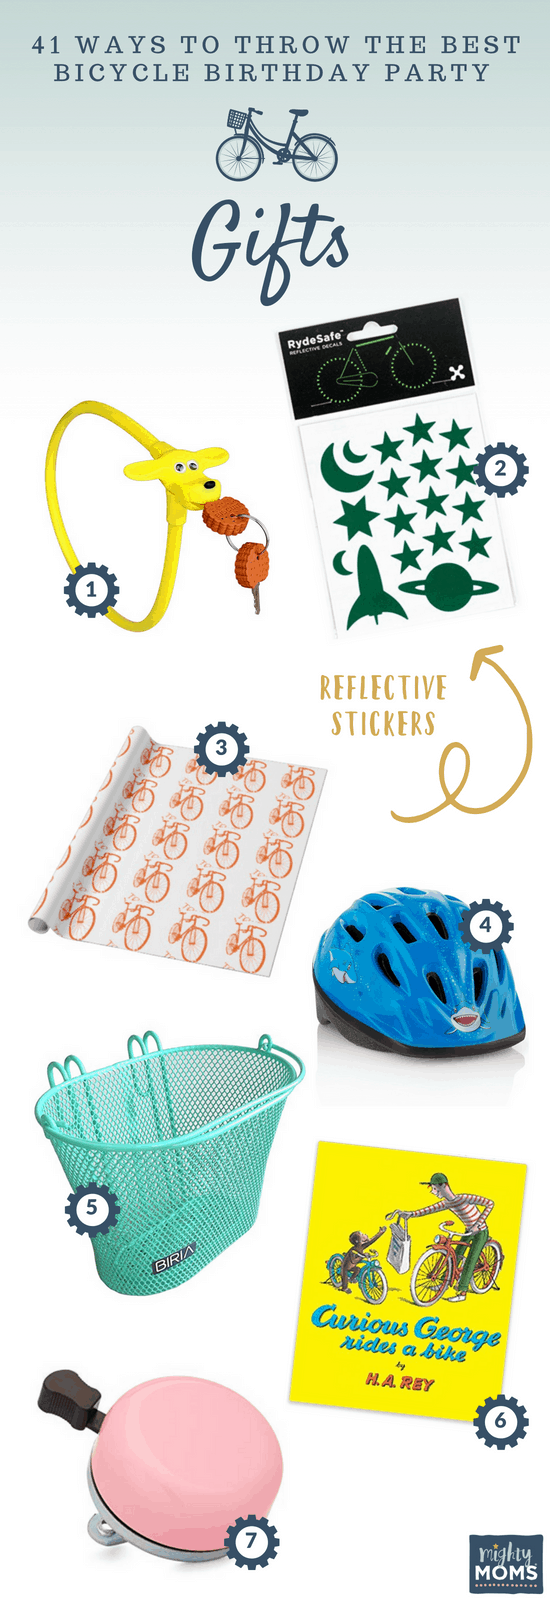 Bicycle Birthday Party Gift Ideas - MightyMoms.club